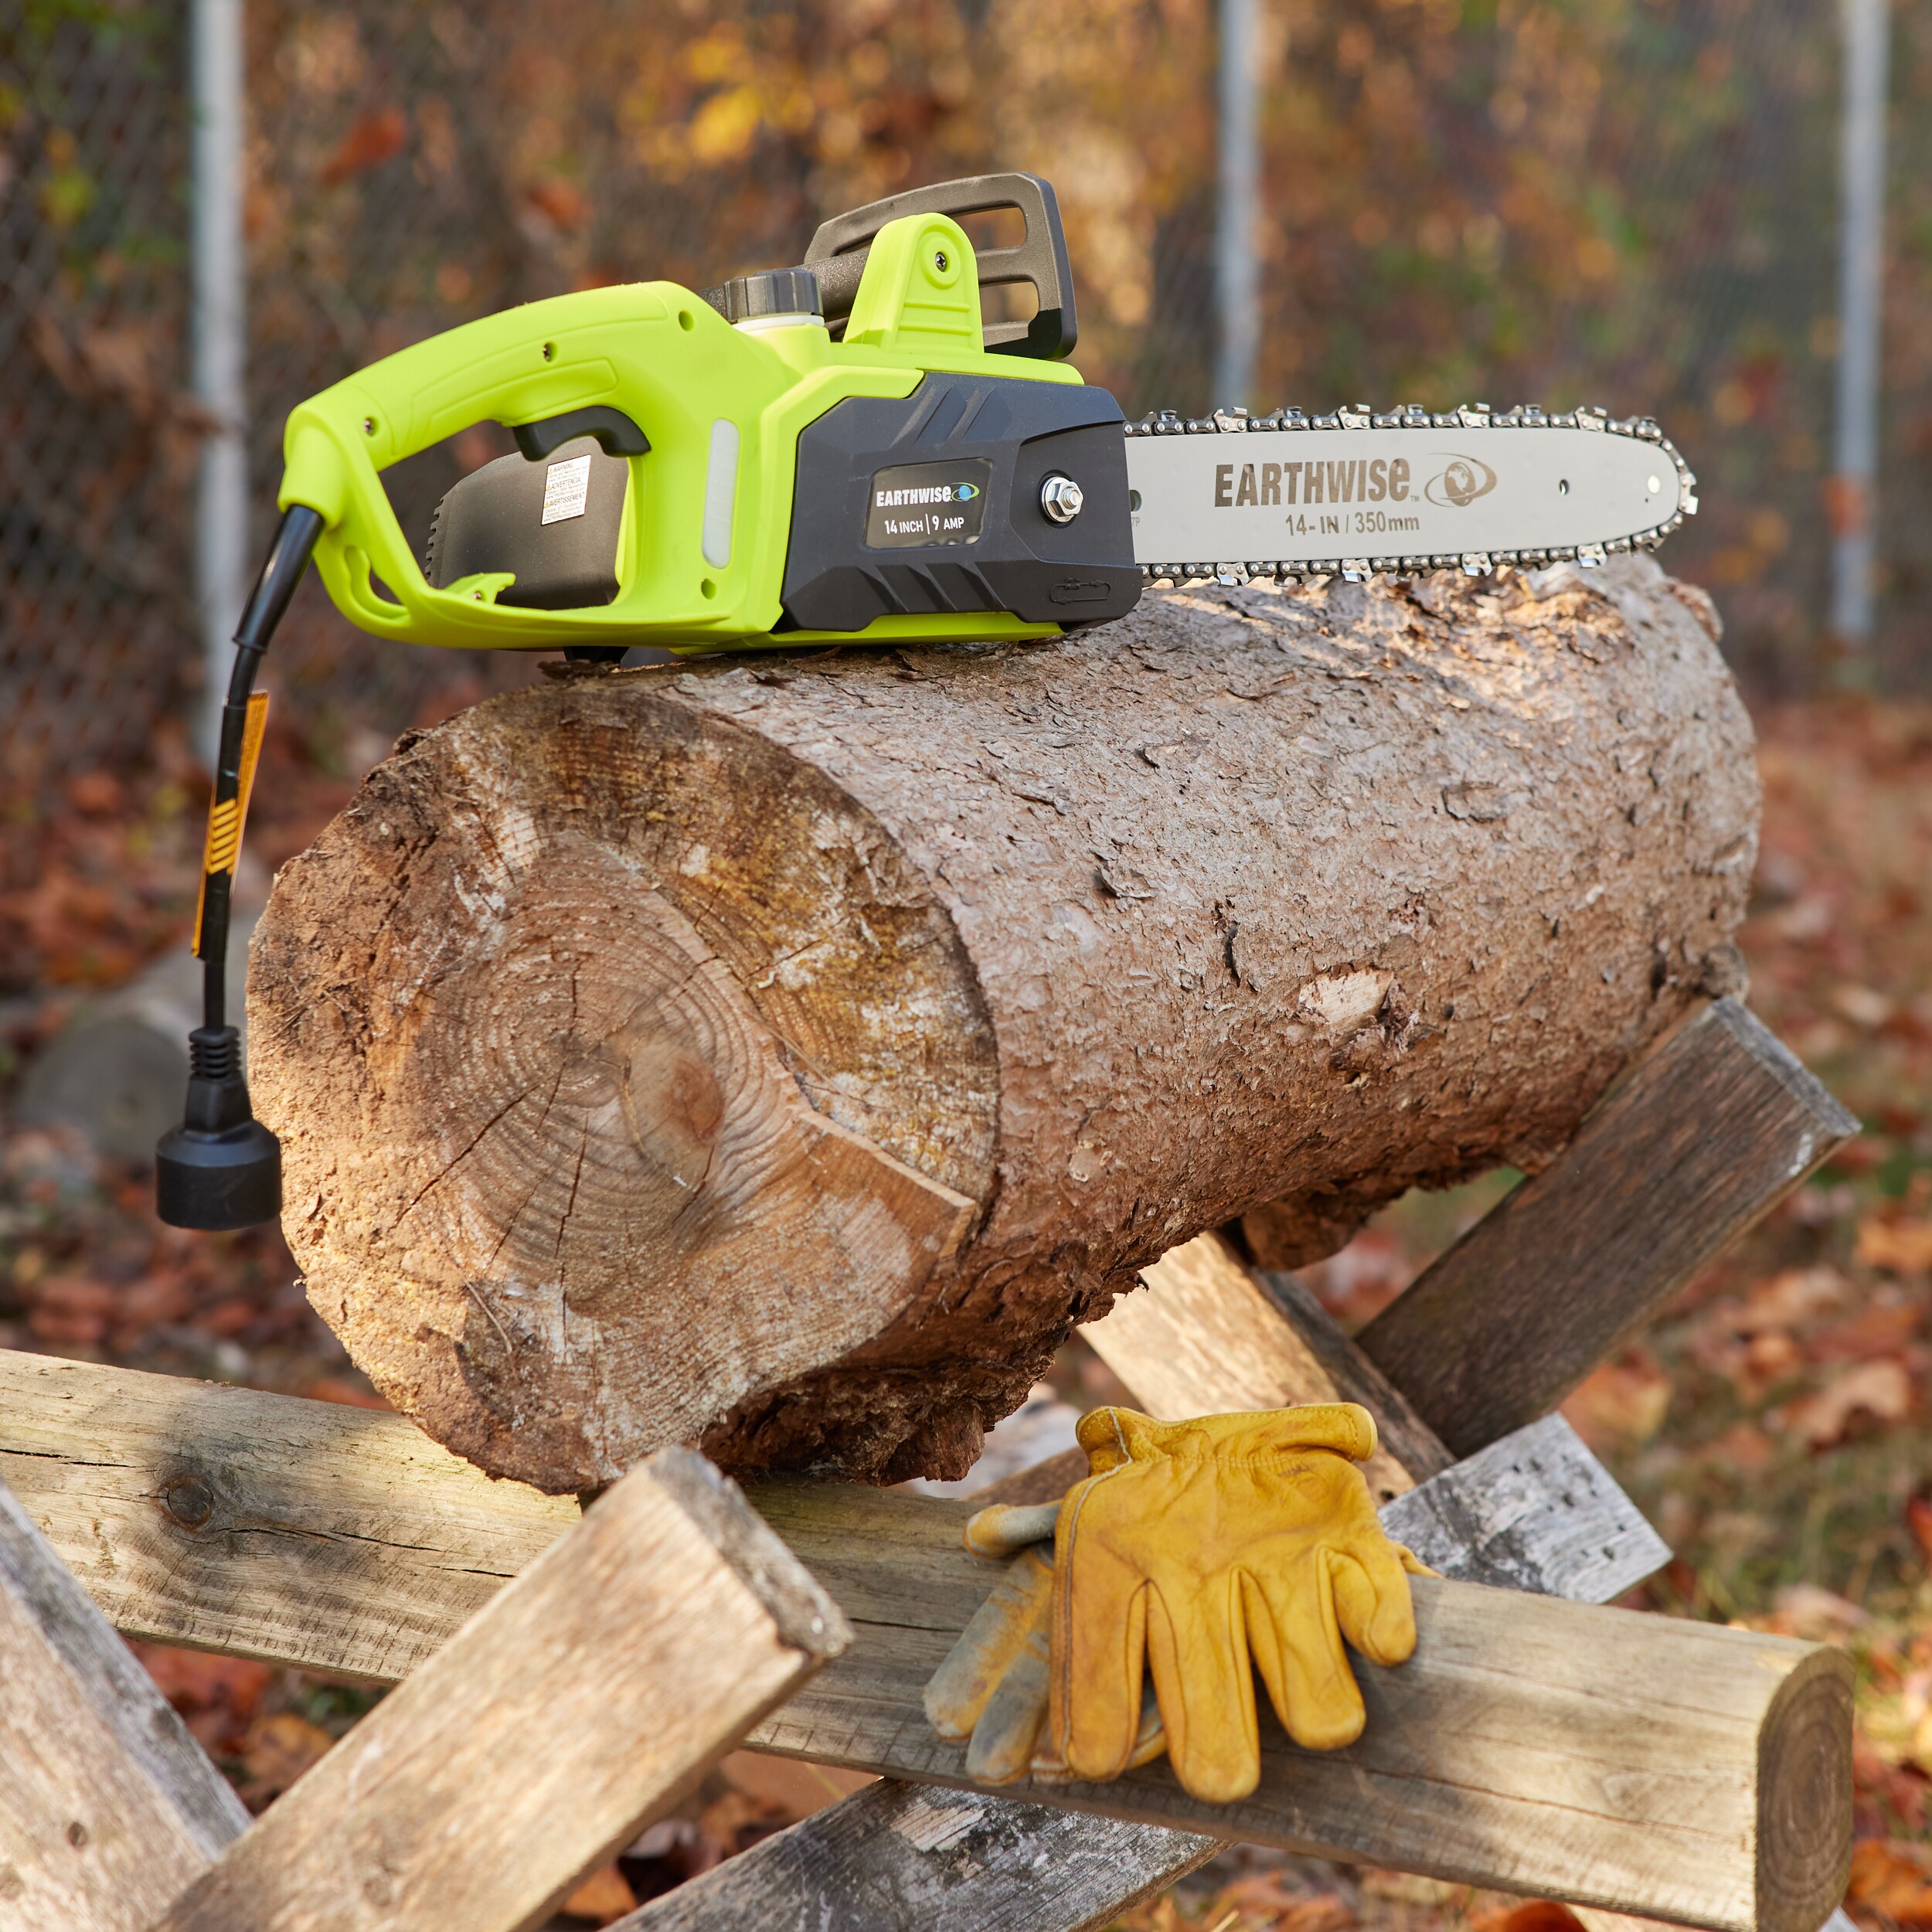 9 Things You Should Never Do to Your Chain Saw